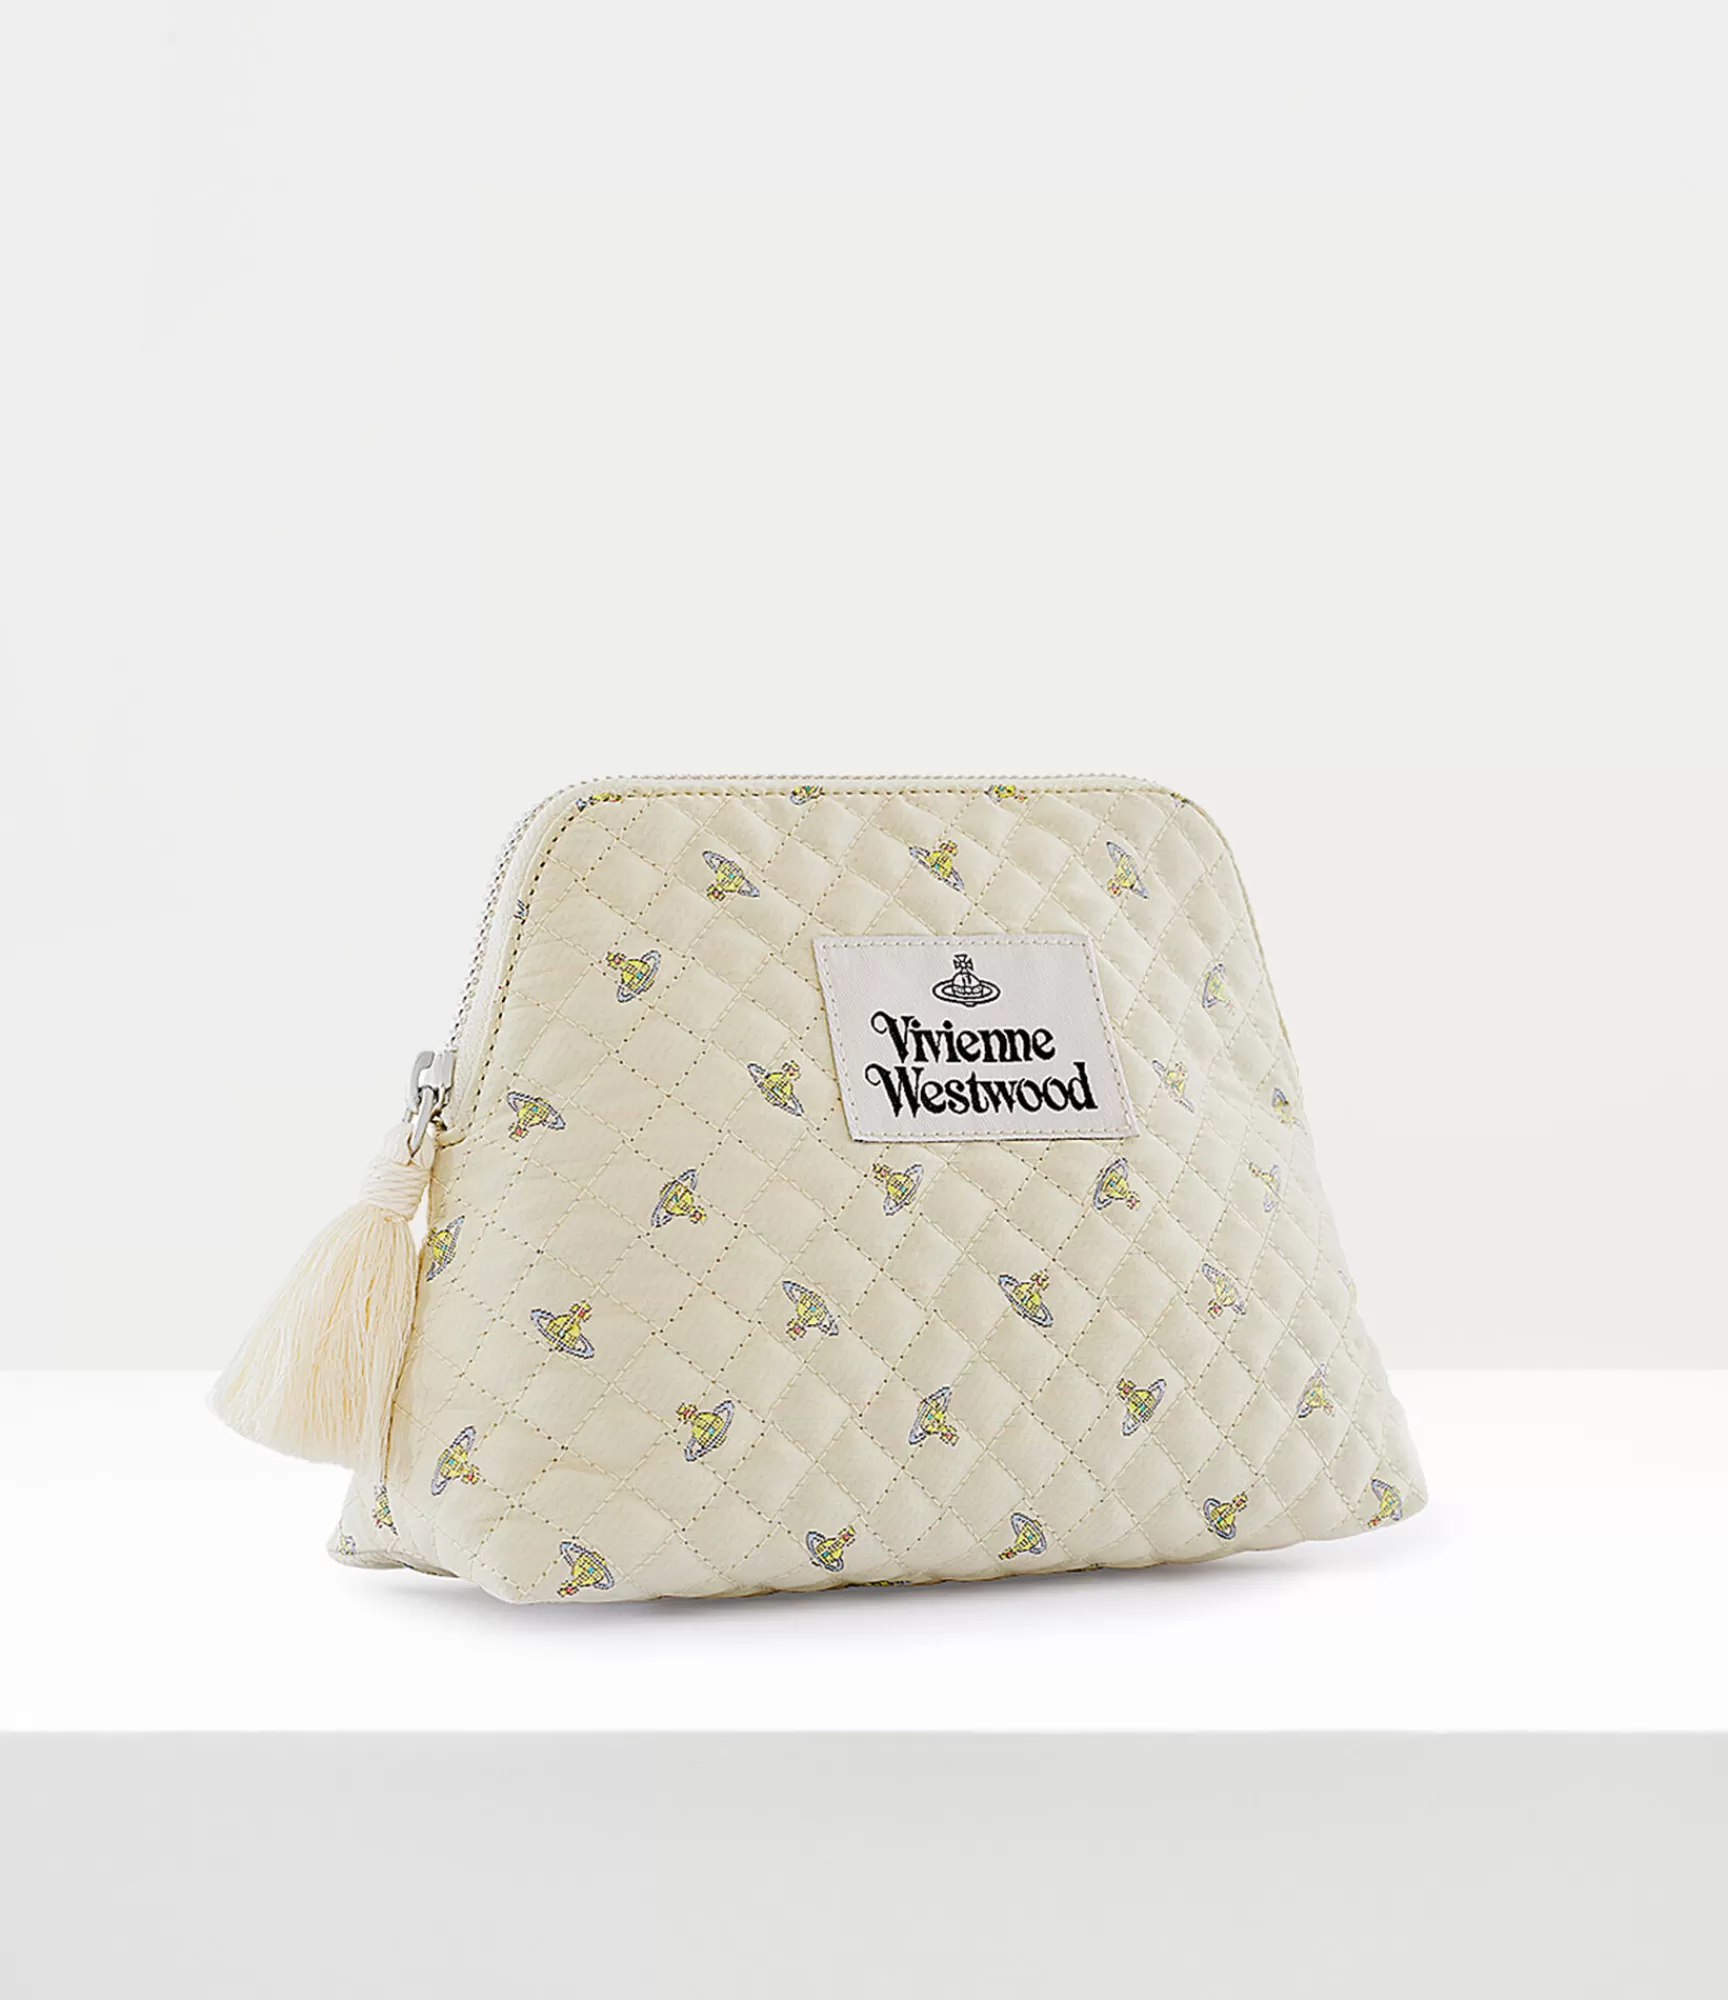 Vivienne Westwood Other Accessories*Small wash bag Beige Multi